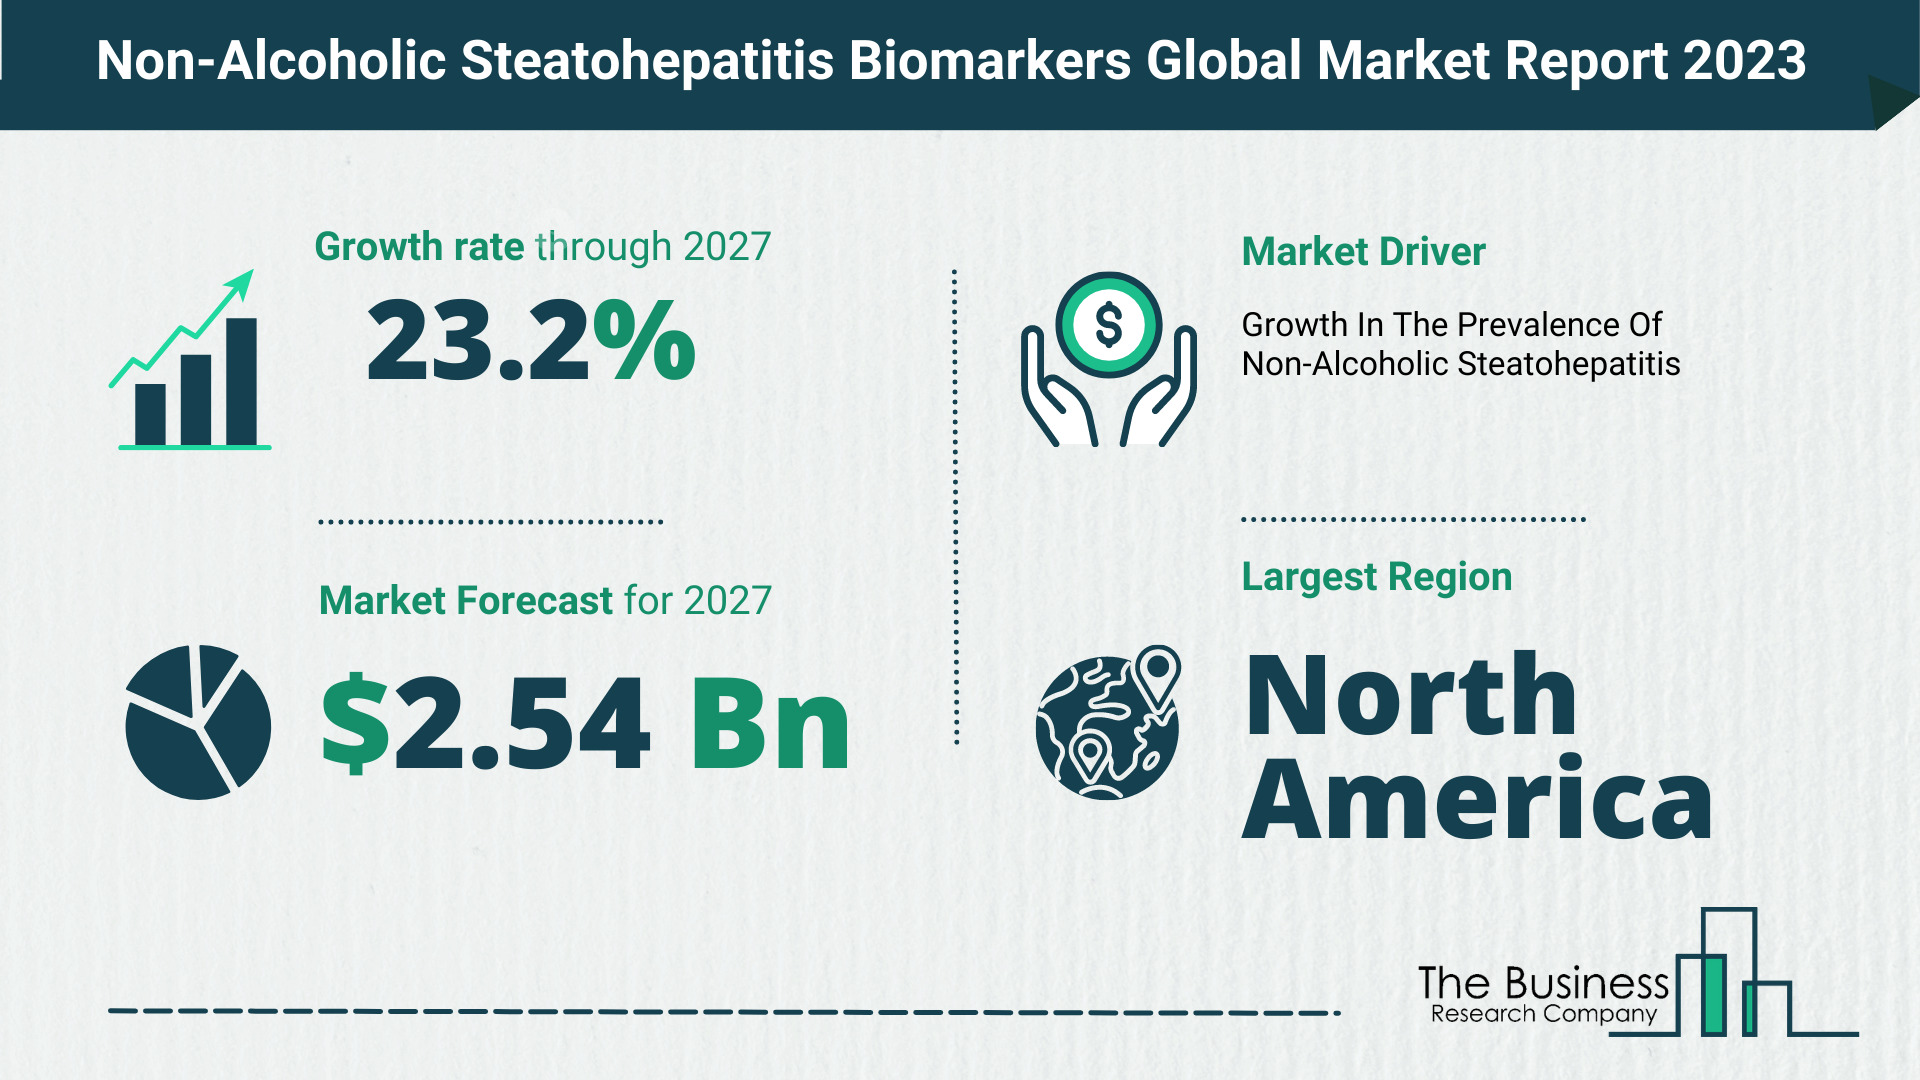 Non-Alcoholic Steatohepatitis Biomarkers Market Size, Share, And Growth Rate Analysis 2023